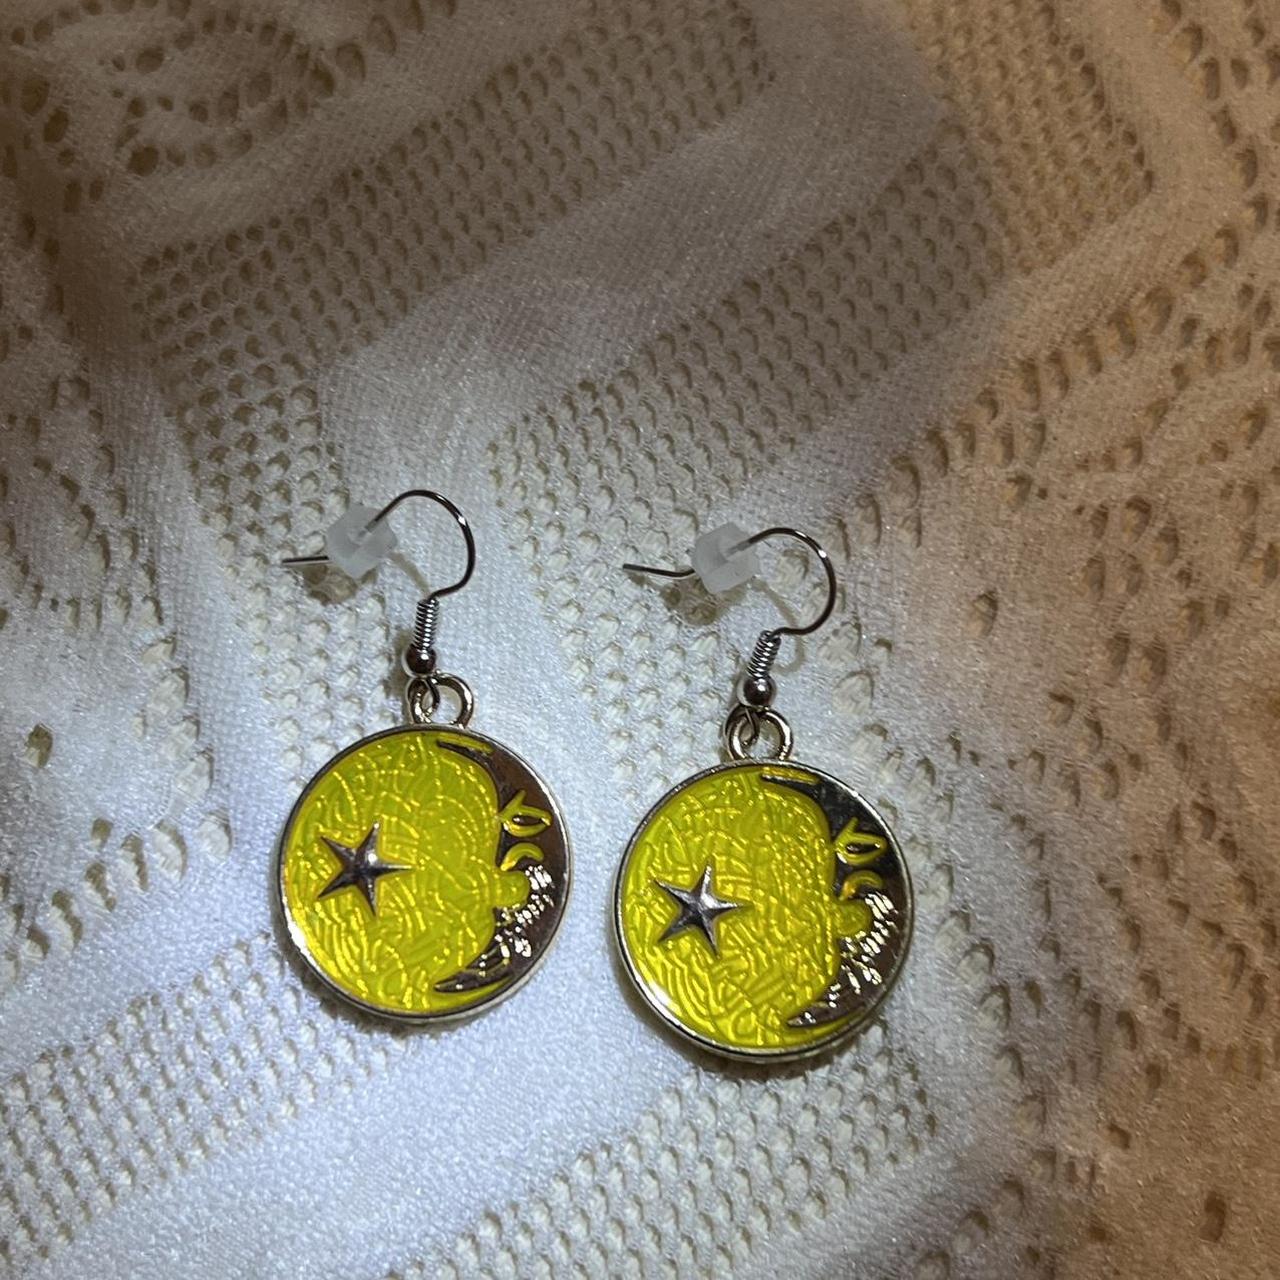 Real yellow moonstone earrings with gold moon - Depop